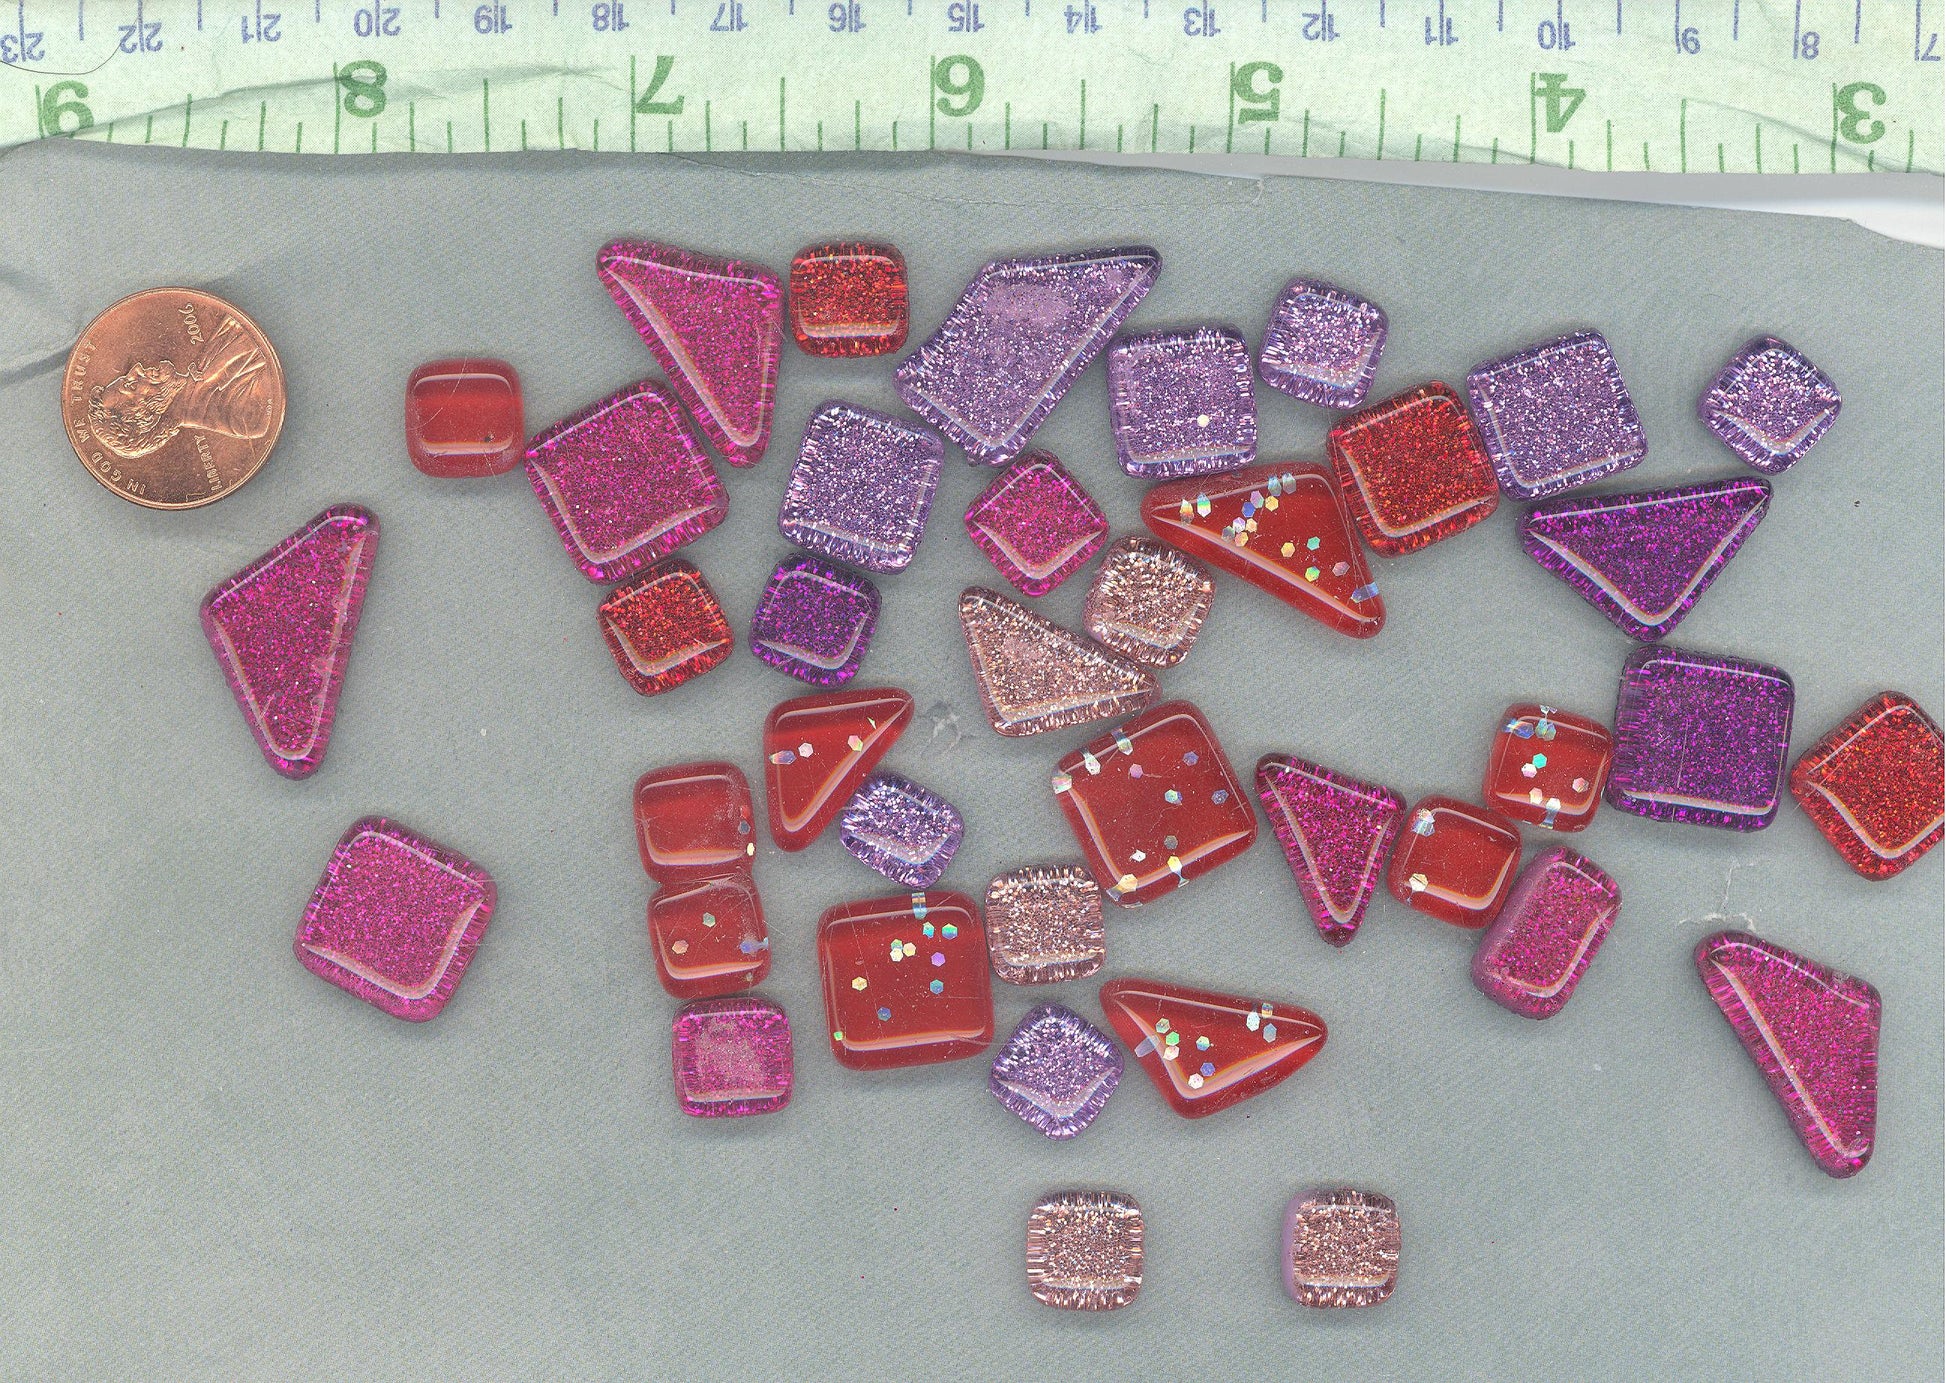 Purple Passion Glitter Tiles - Assorted Shapes and Colors - 100 grams Mosaic Puzzle Tiles Glass